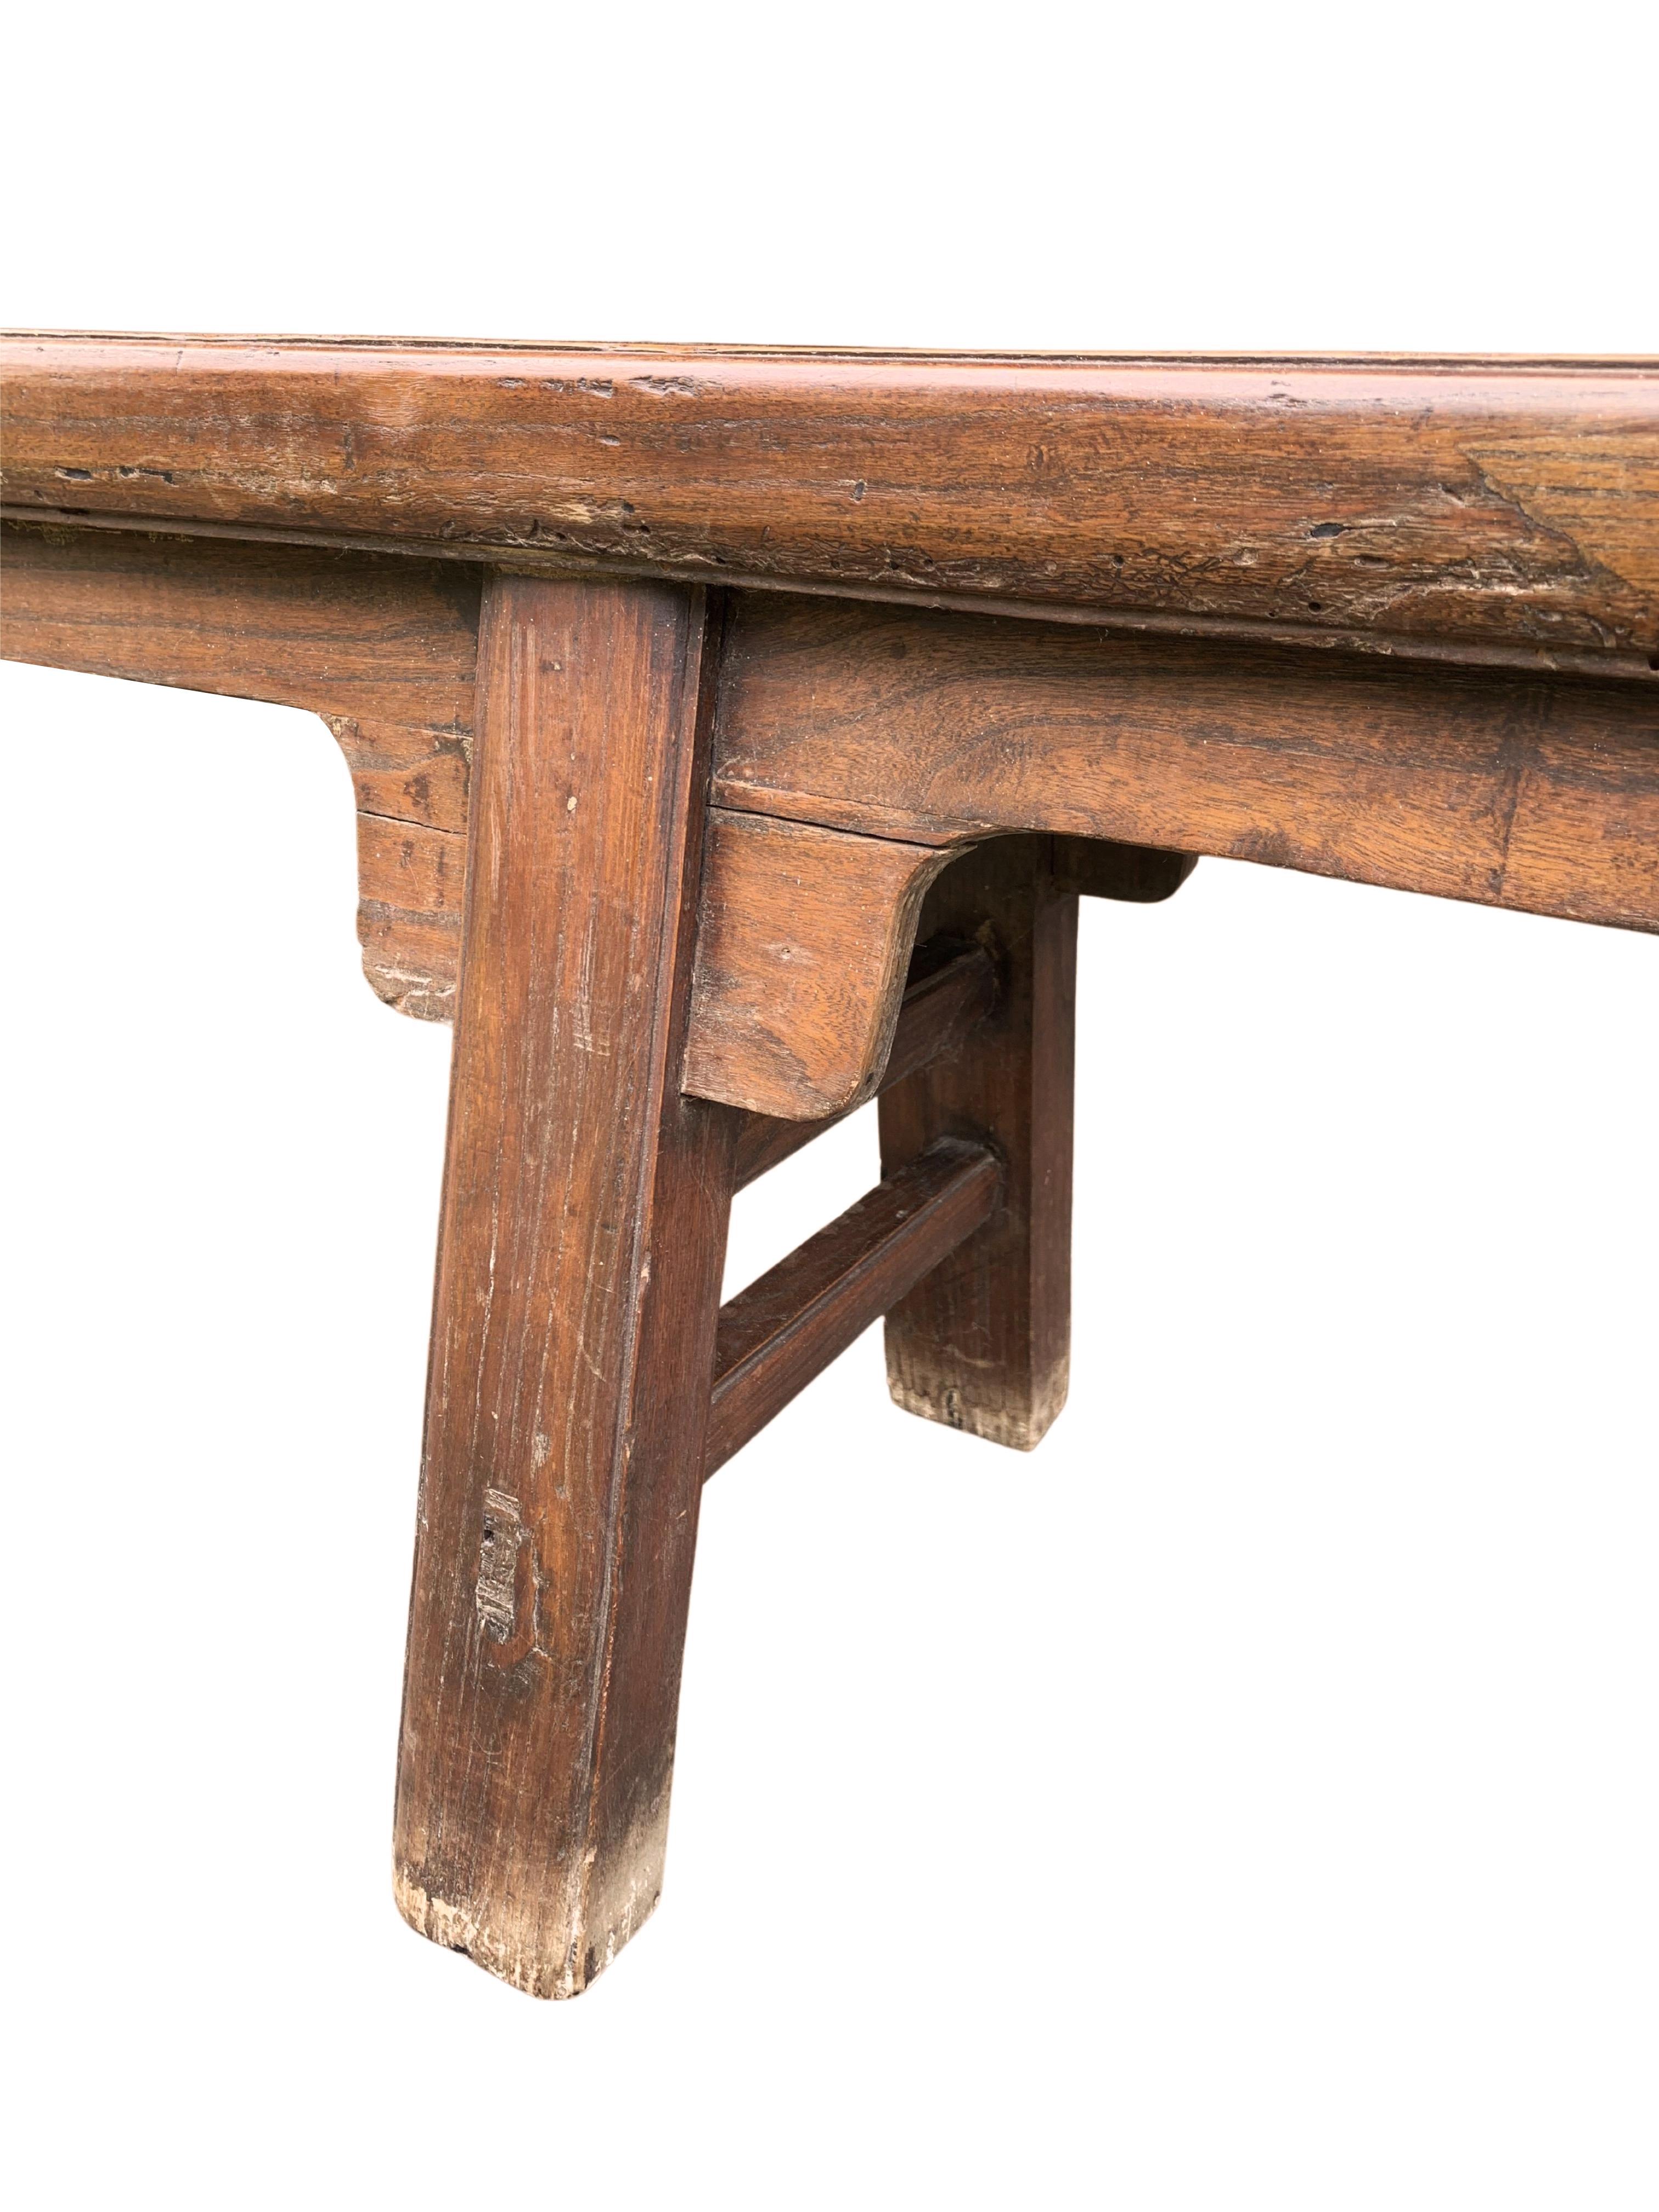 19th Century Chinese Elm Wood Three Person Long Bench, Qing Dynasty